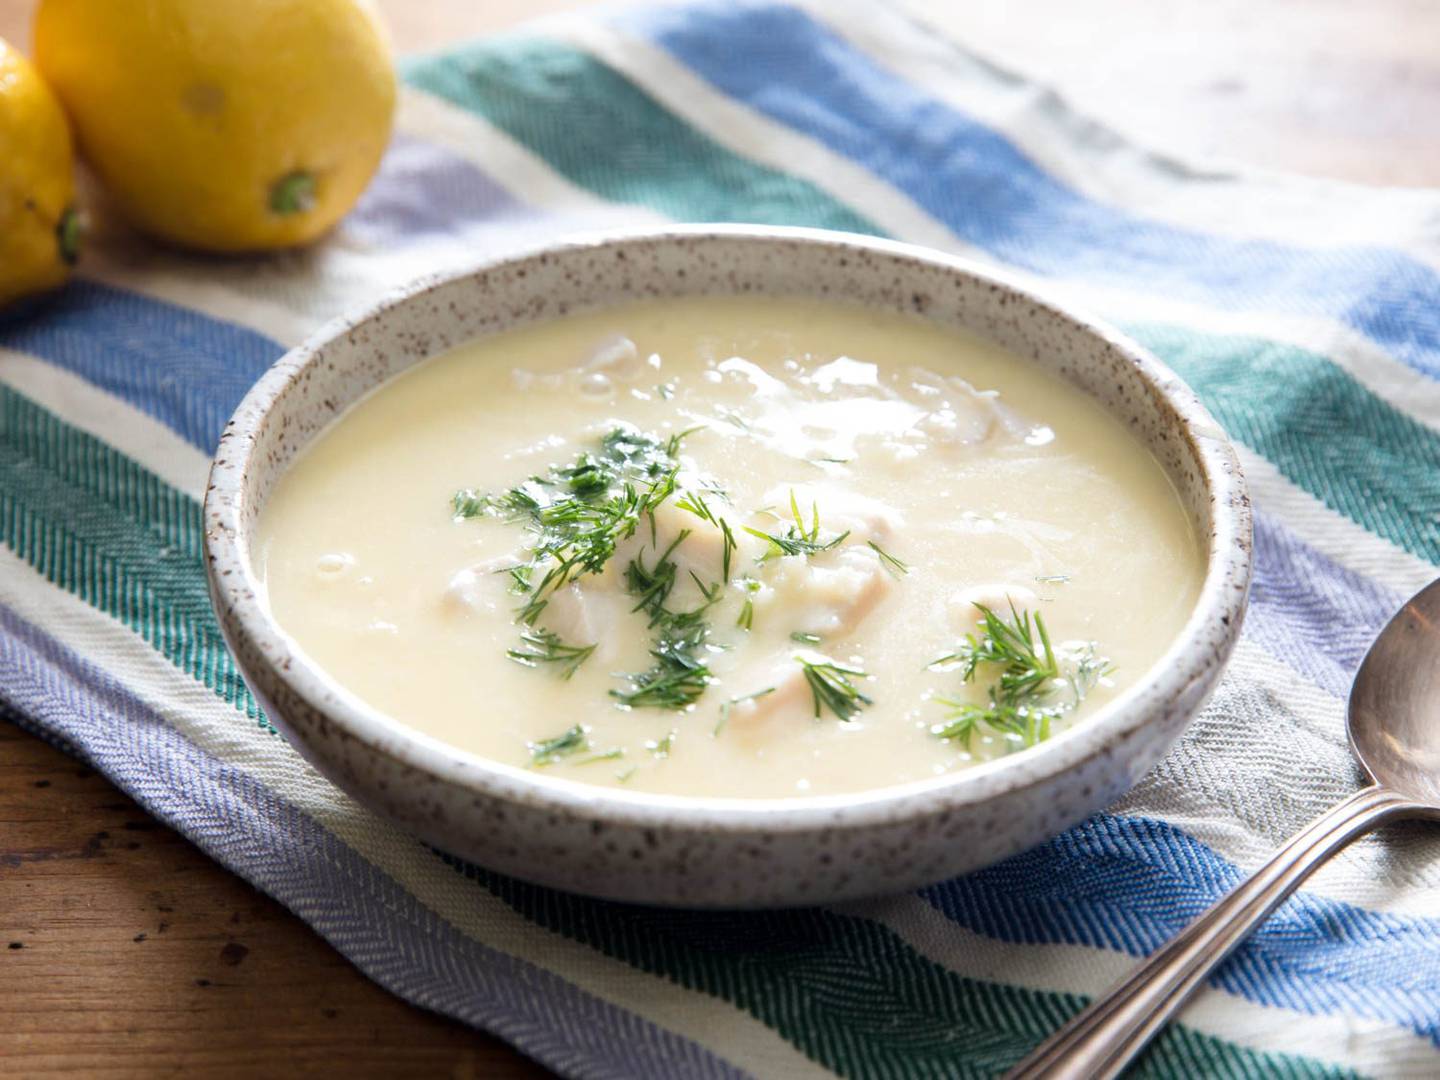 Avgolemono soup, eaten in Cyprus on rainy days, is at once creamy and citrusy